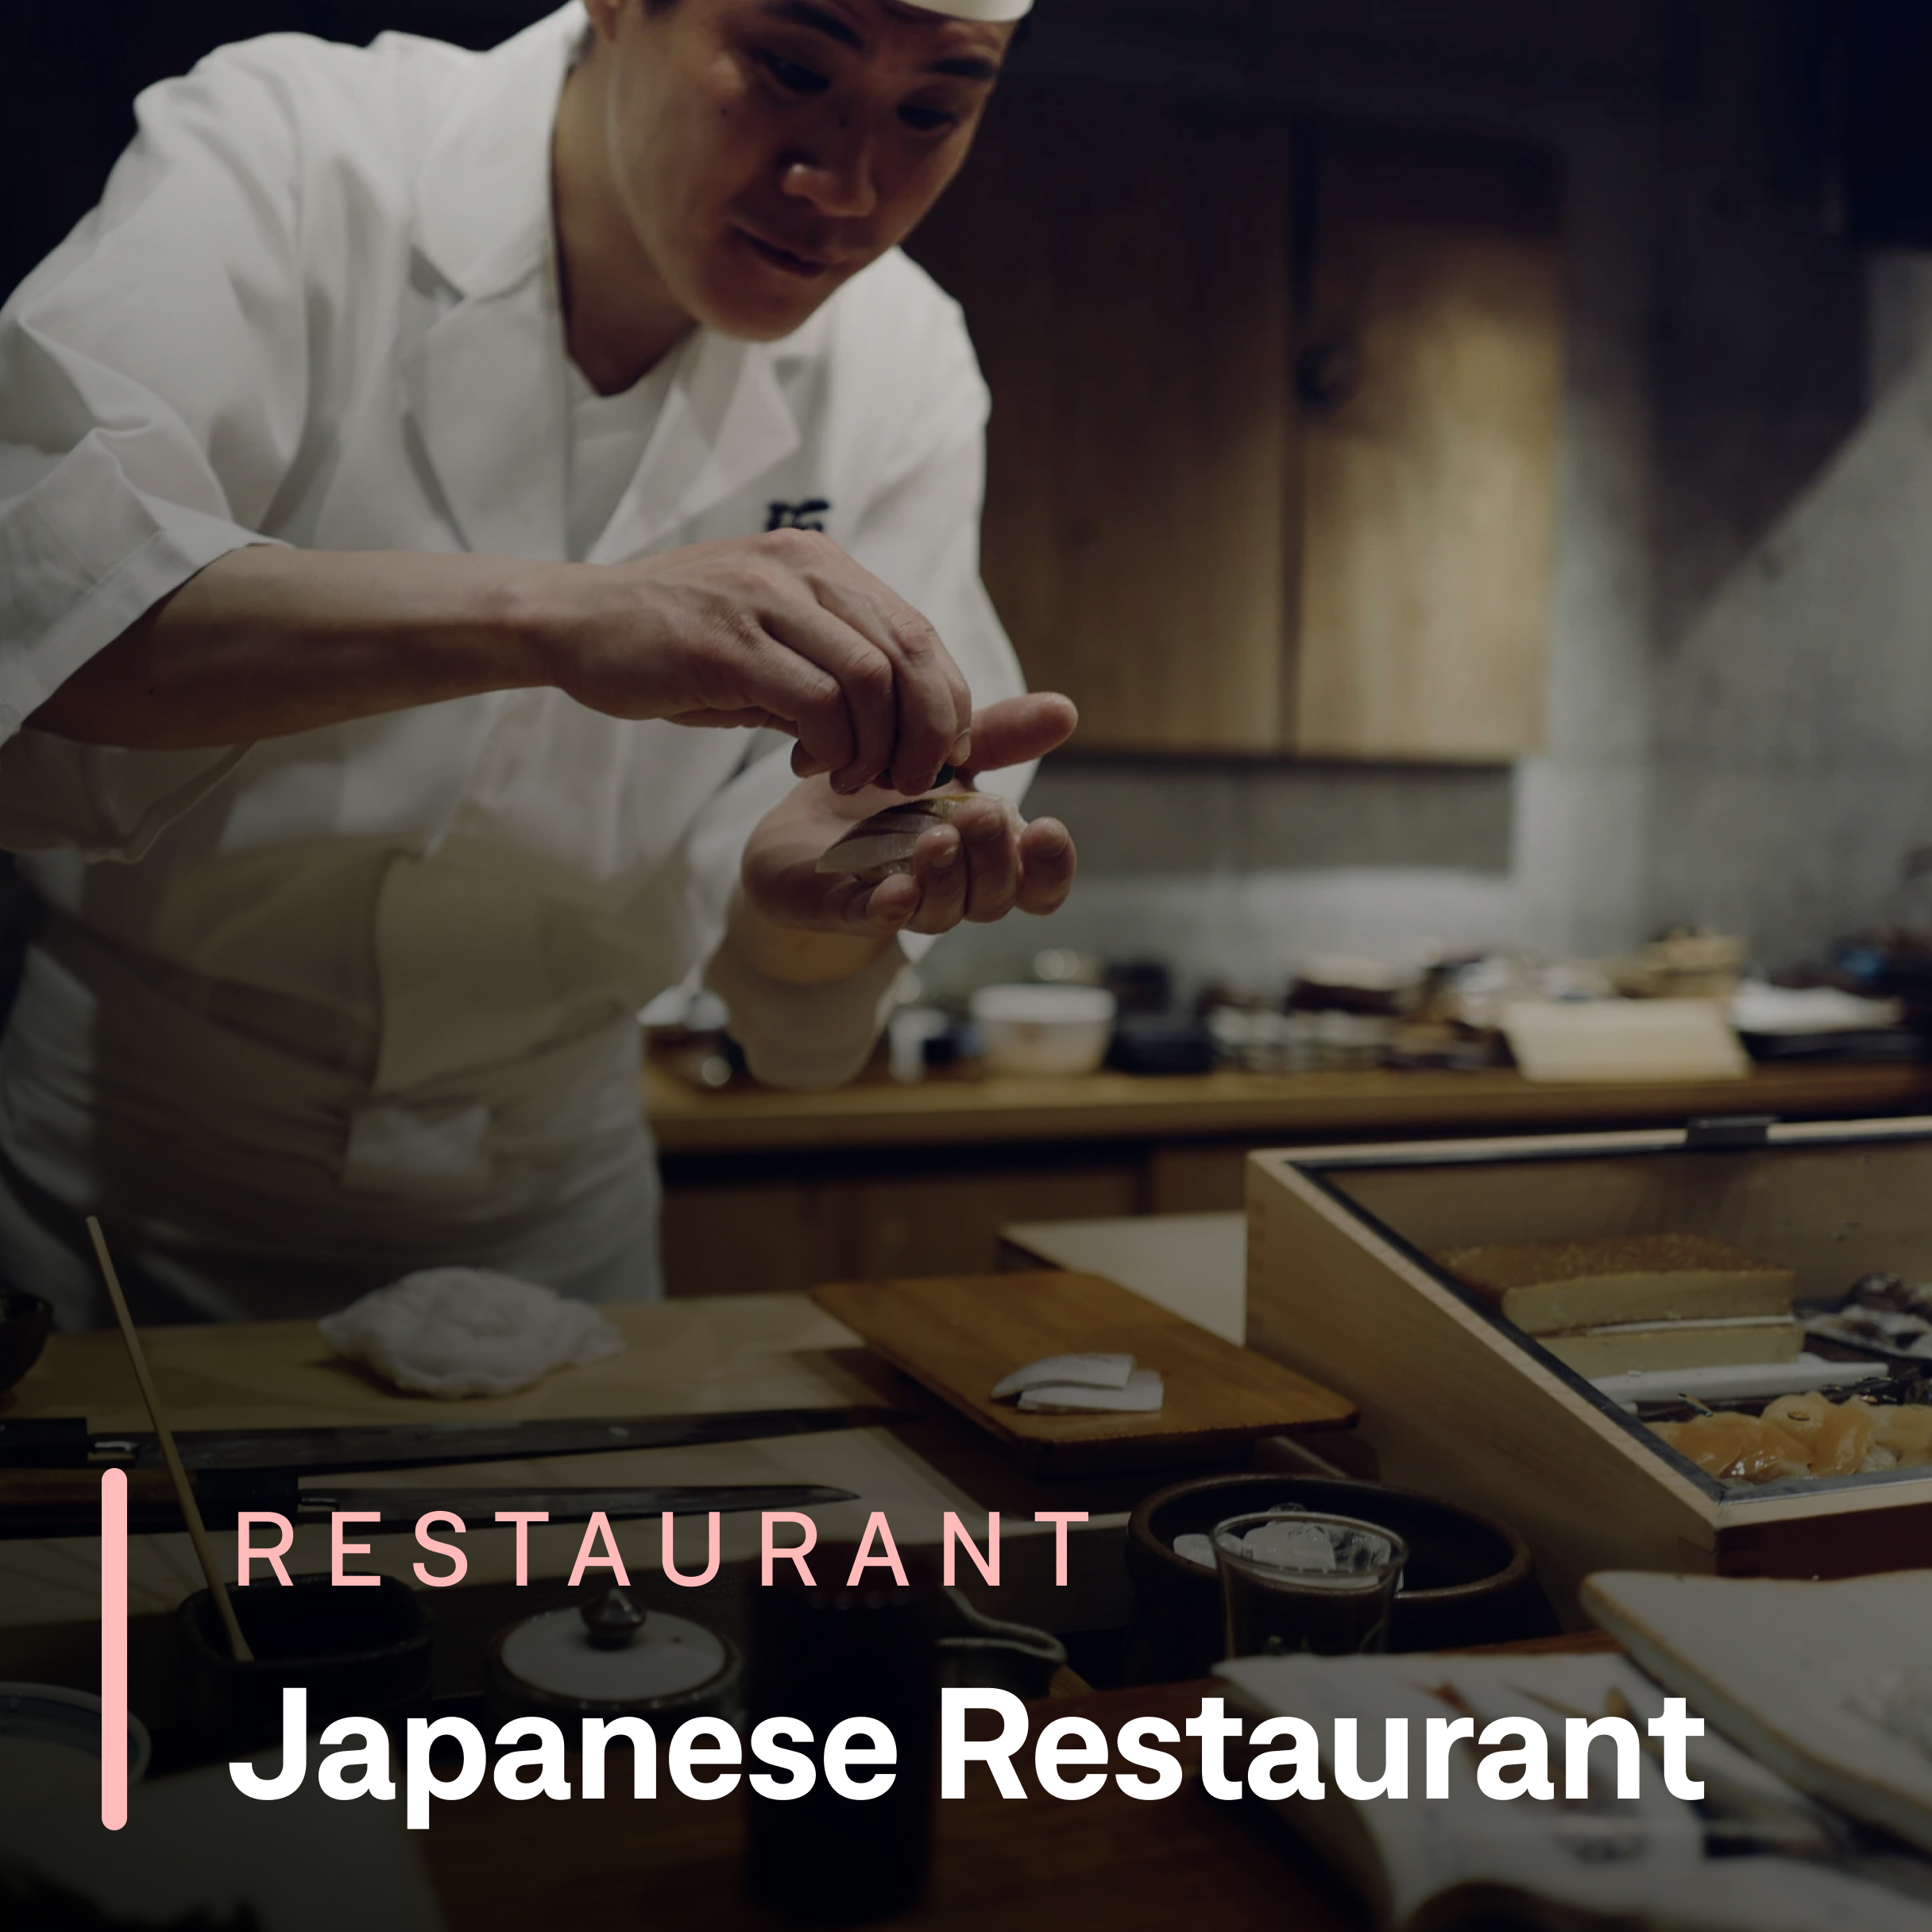 The elegant Japanese restaurant Playlist with a formal feel